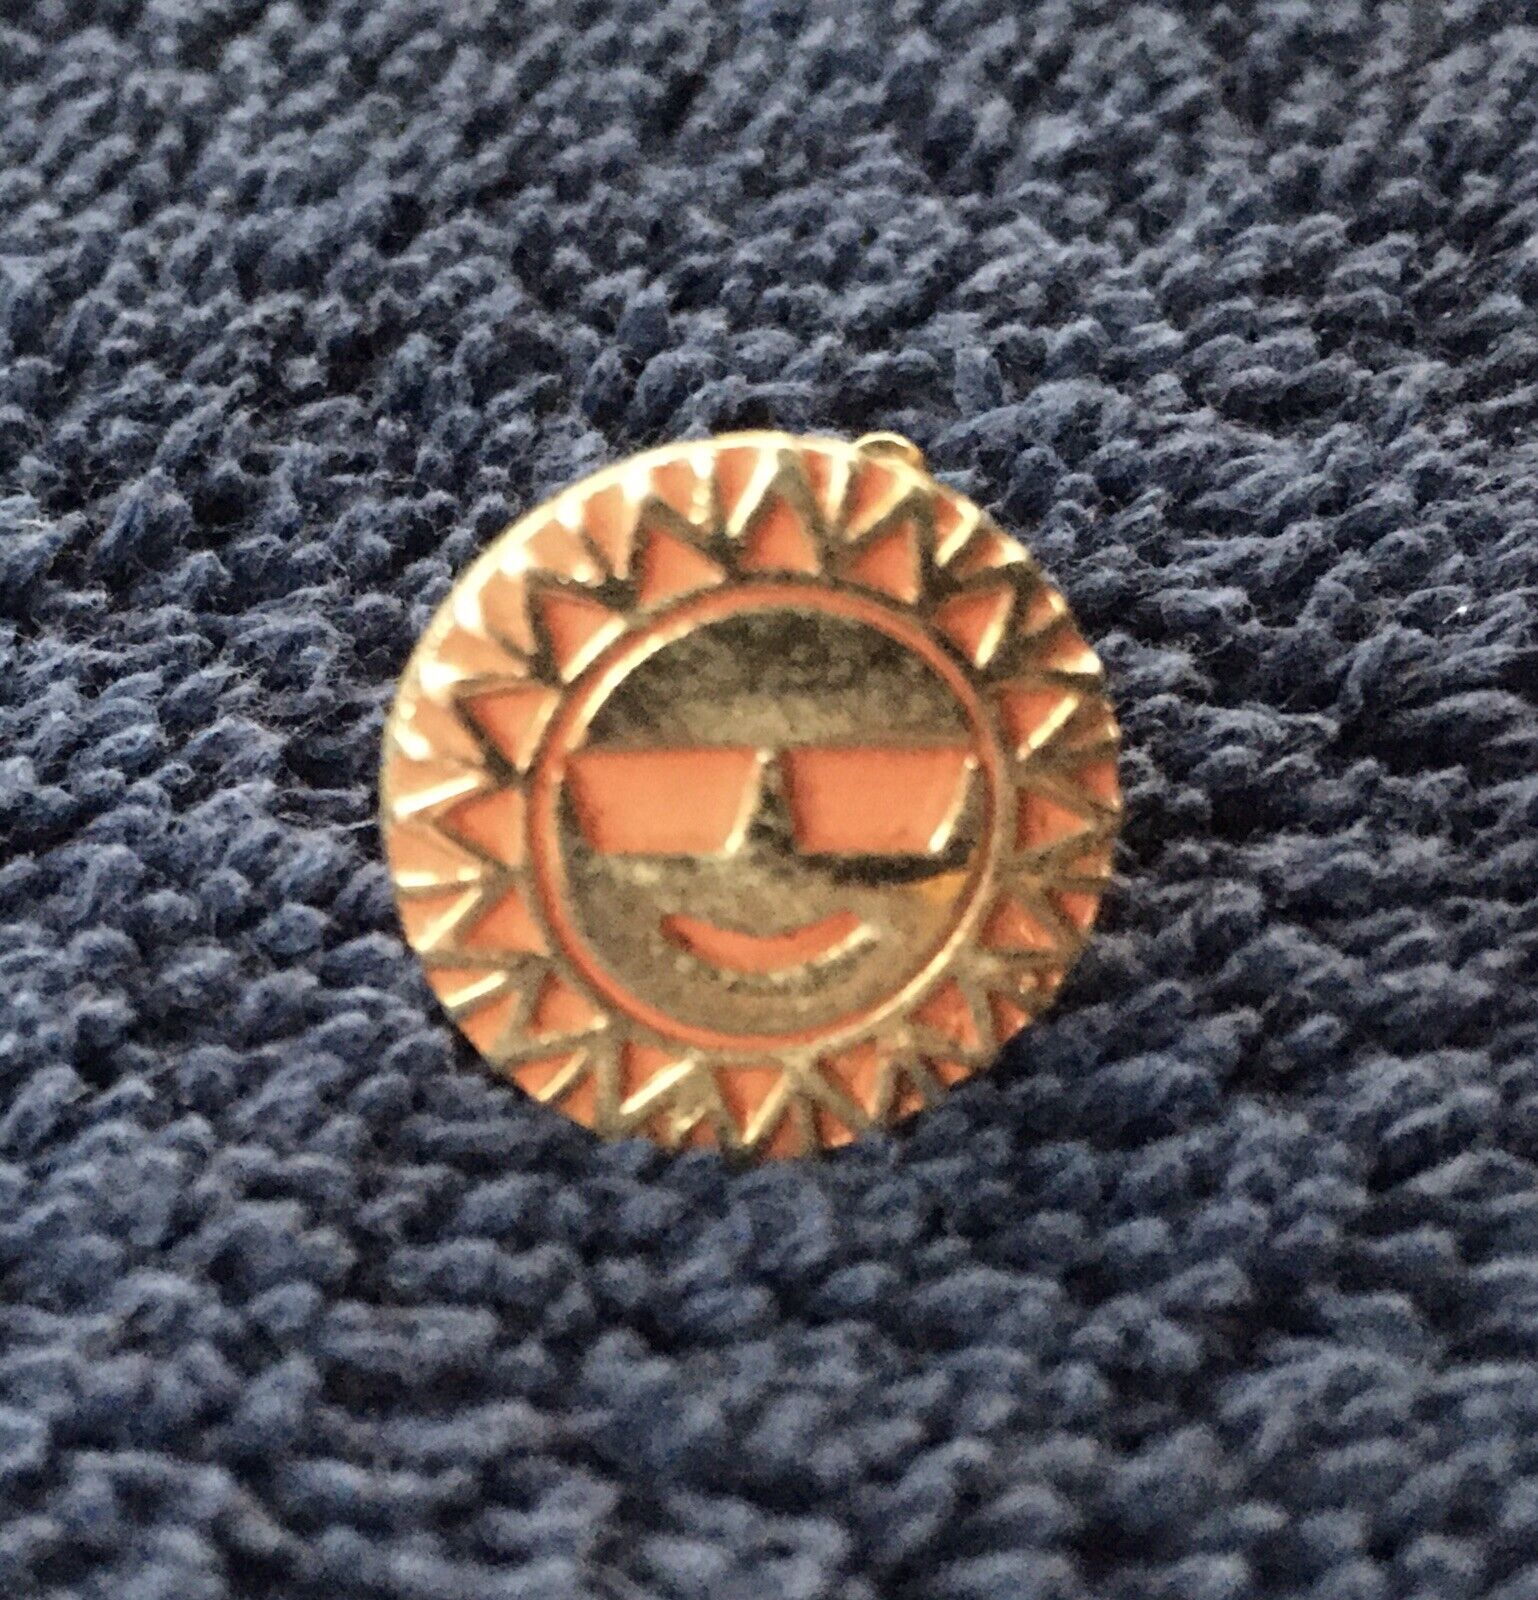 Smiling Gold Colored Sun Metal Lapel Pin Around 9/16” Wide